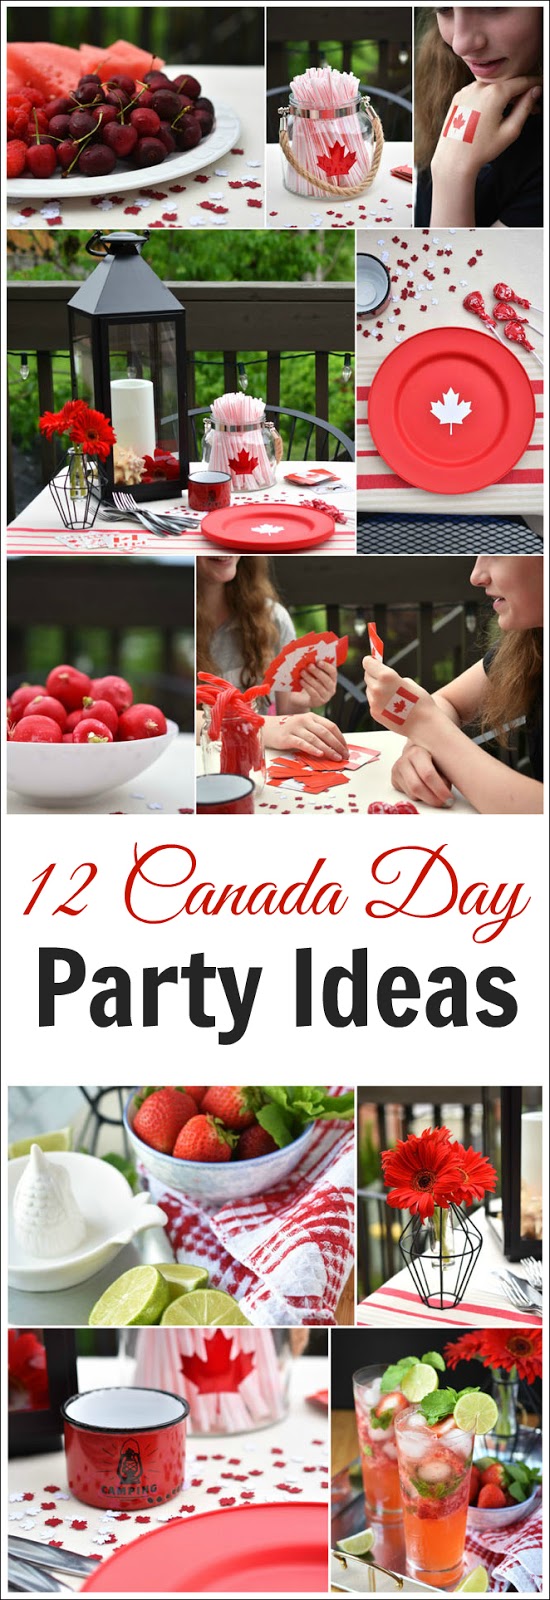 12 Canada Day Party easy decor and food ideas.